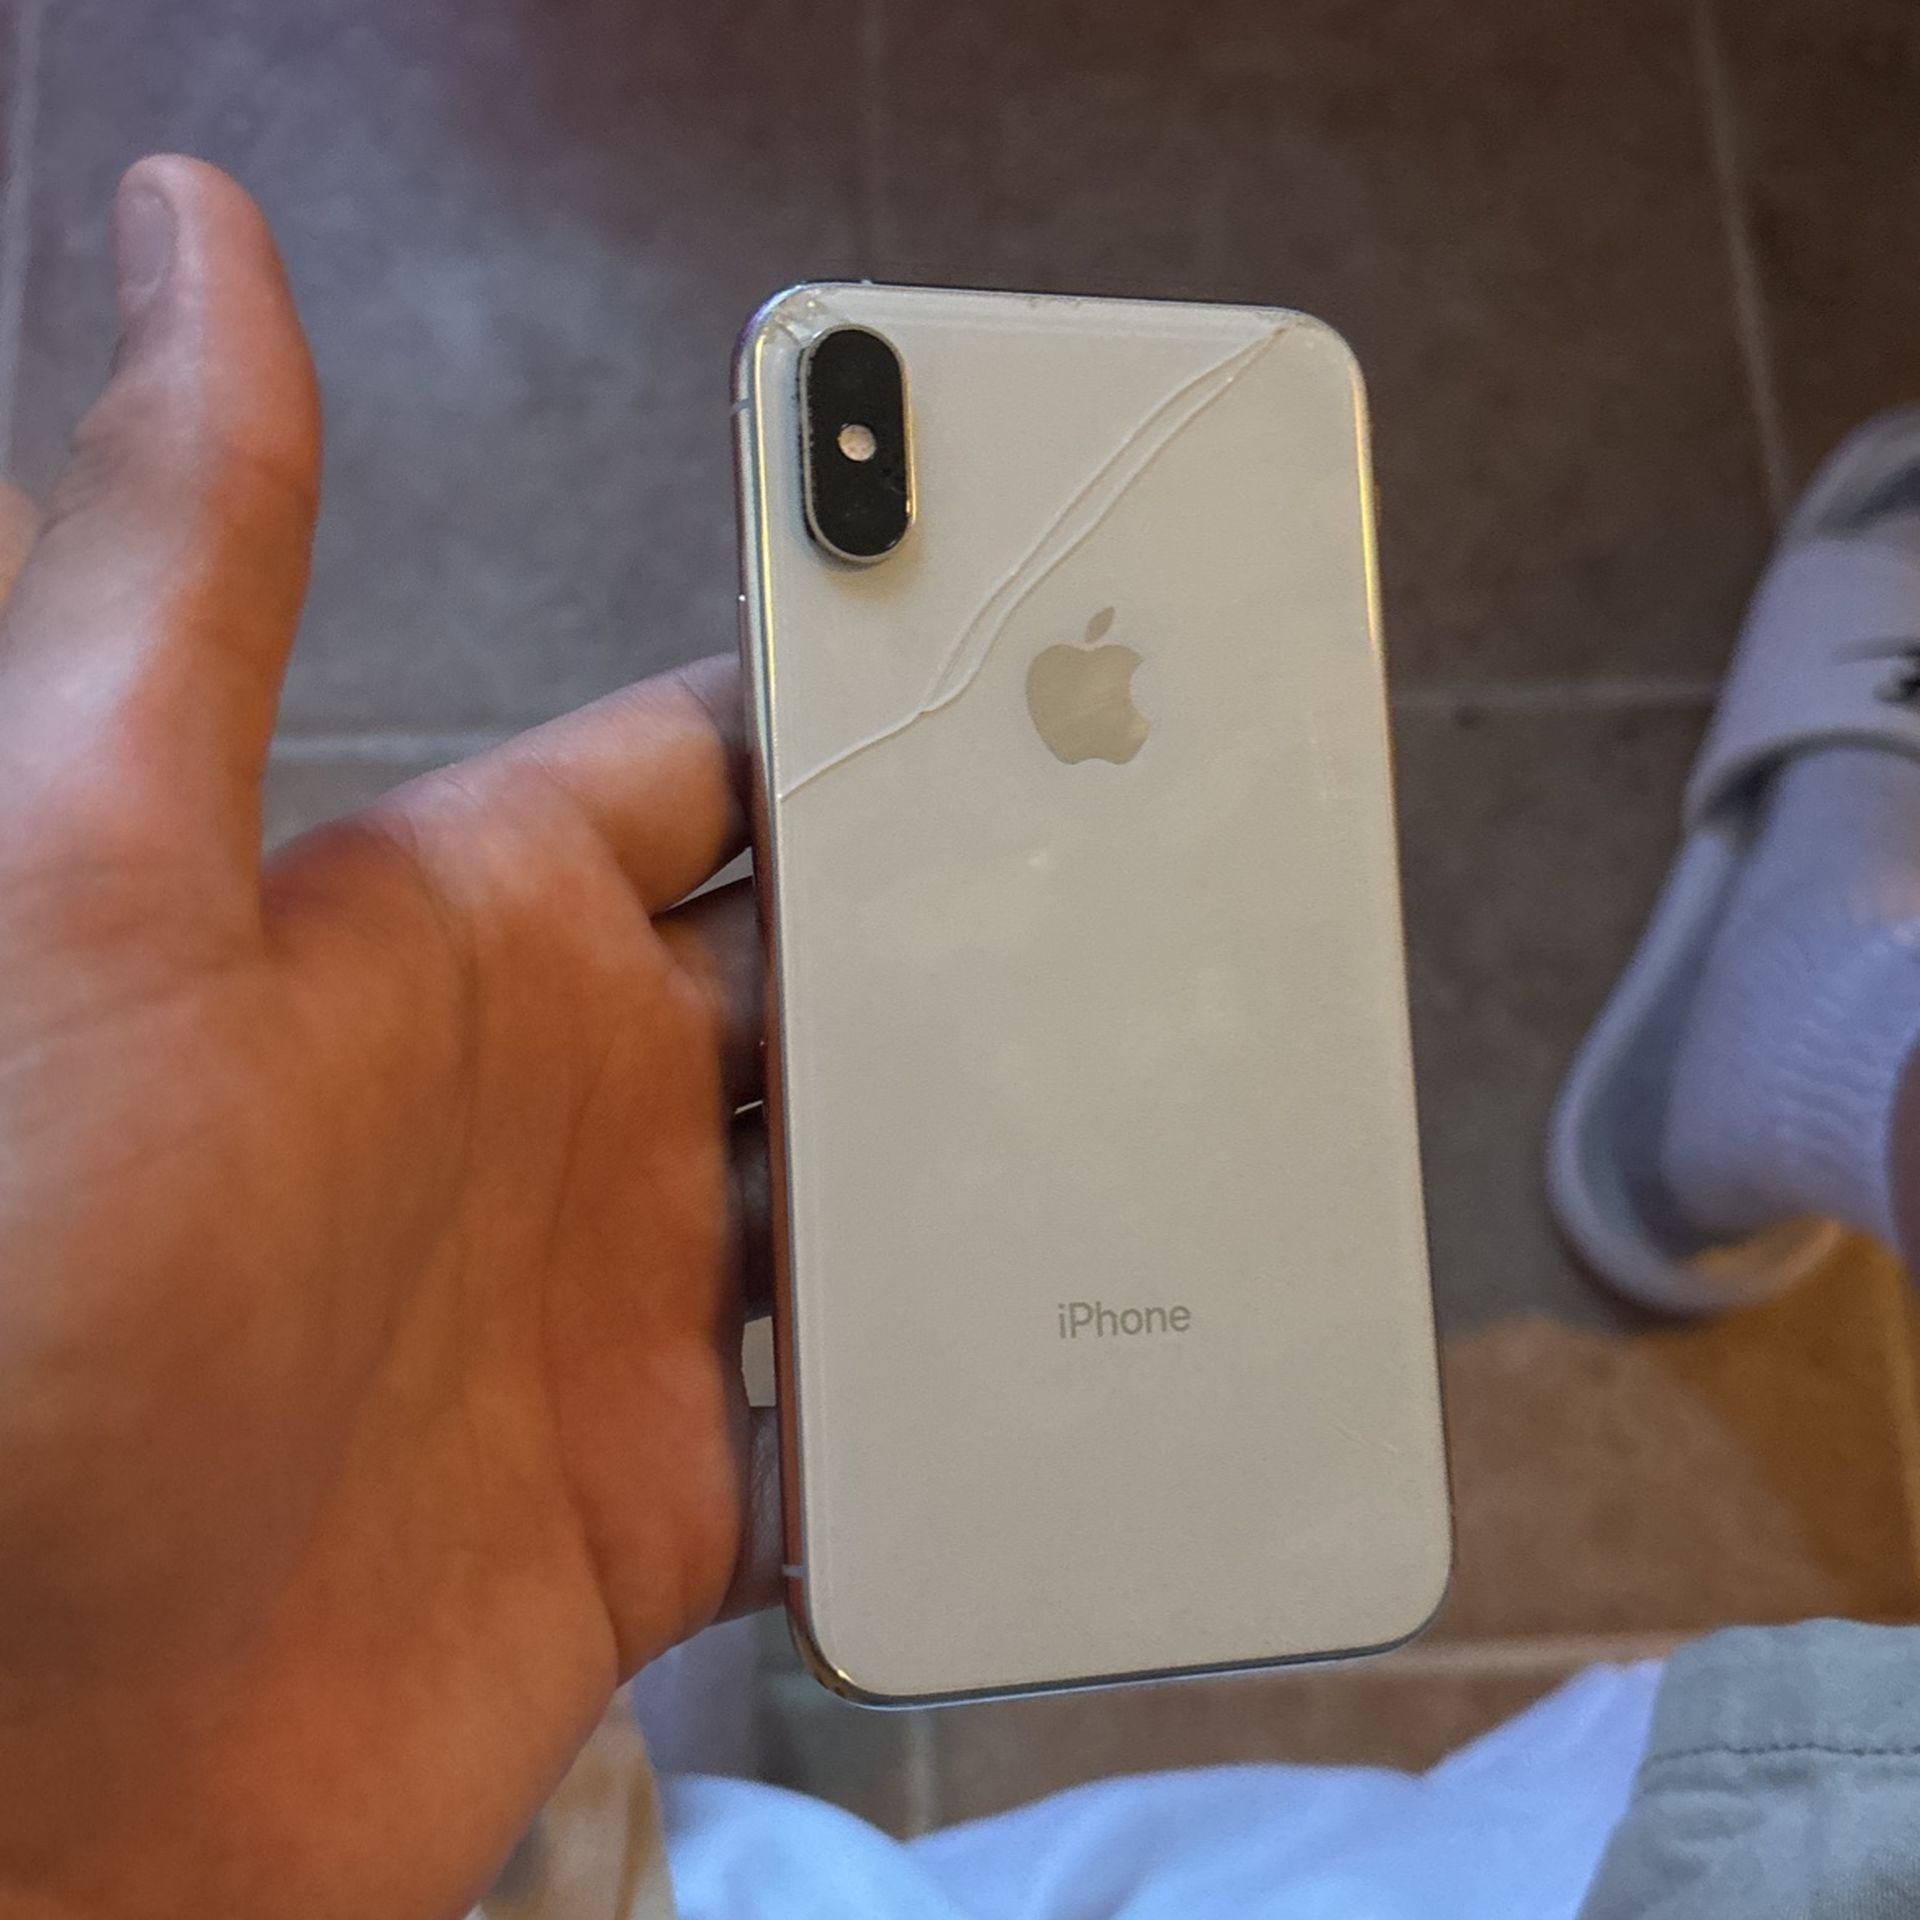 iphone x (LOCKED OUT)